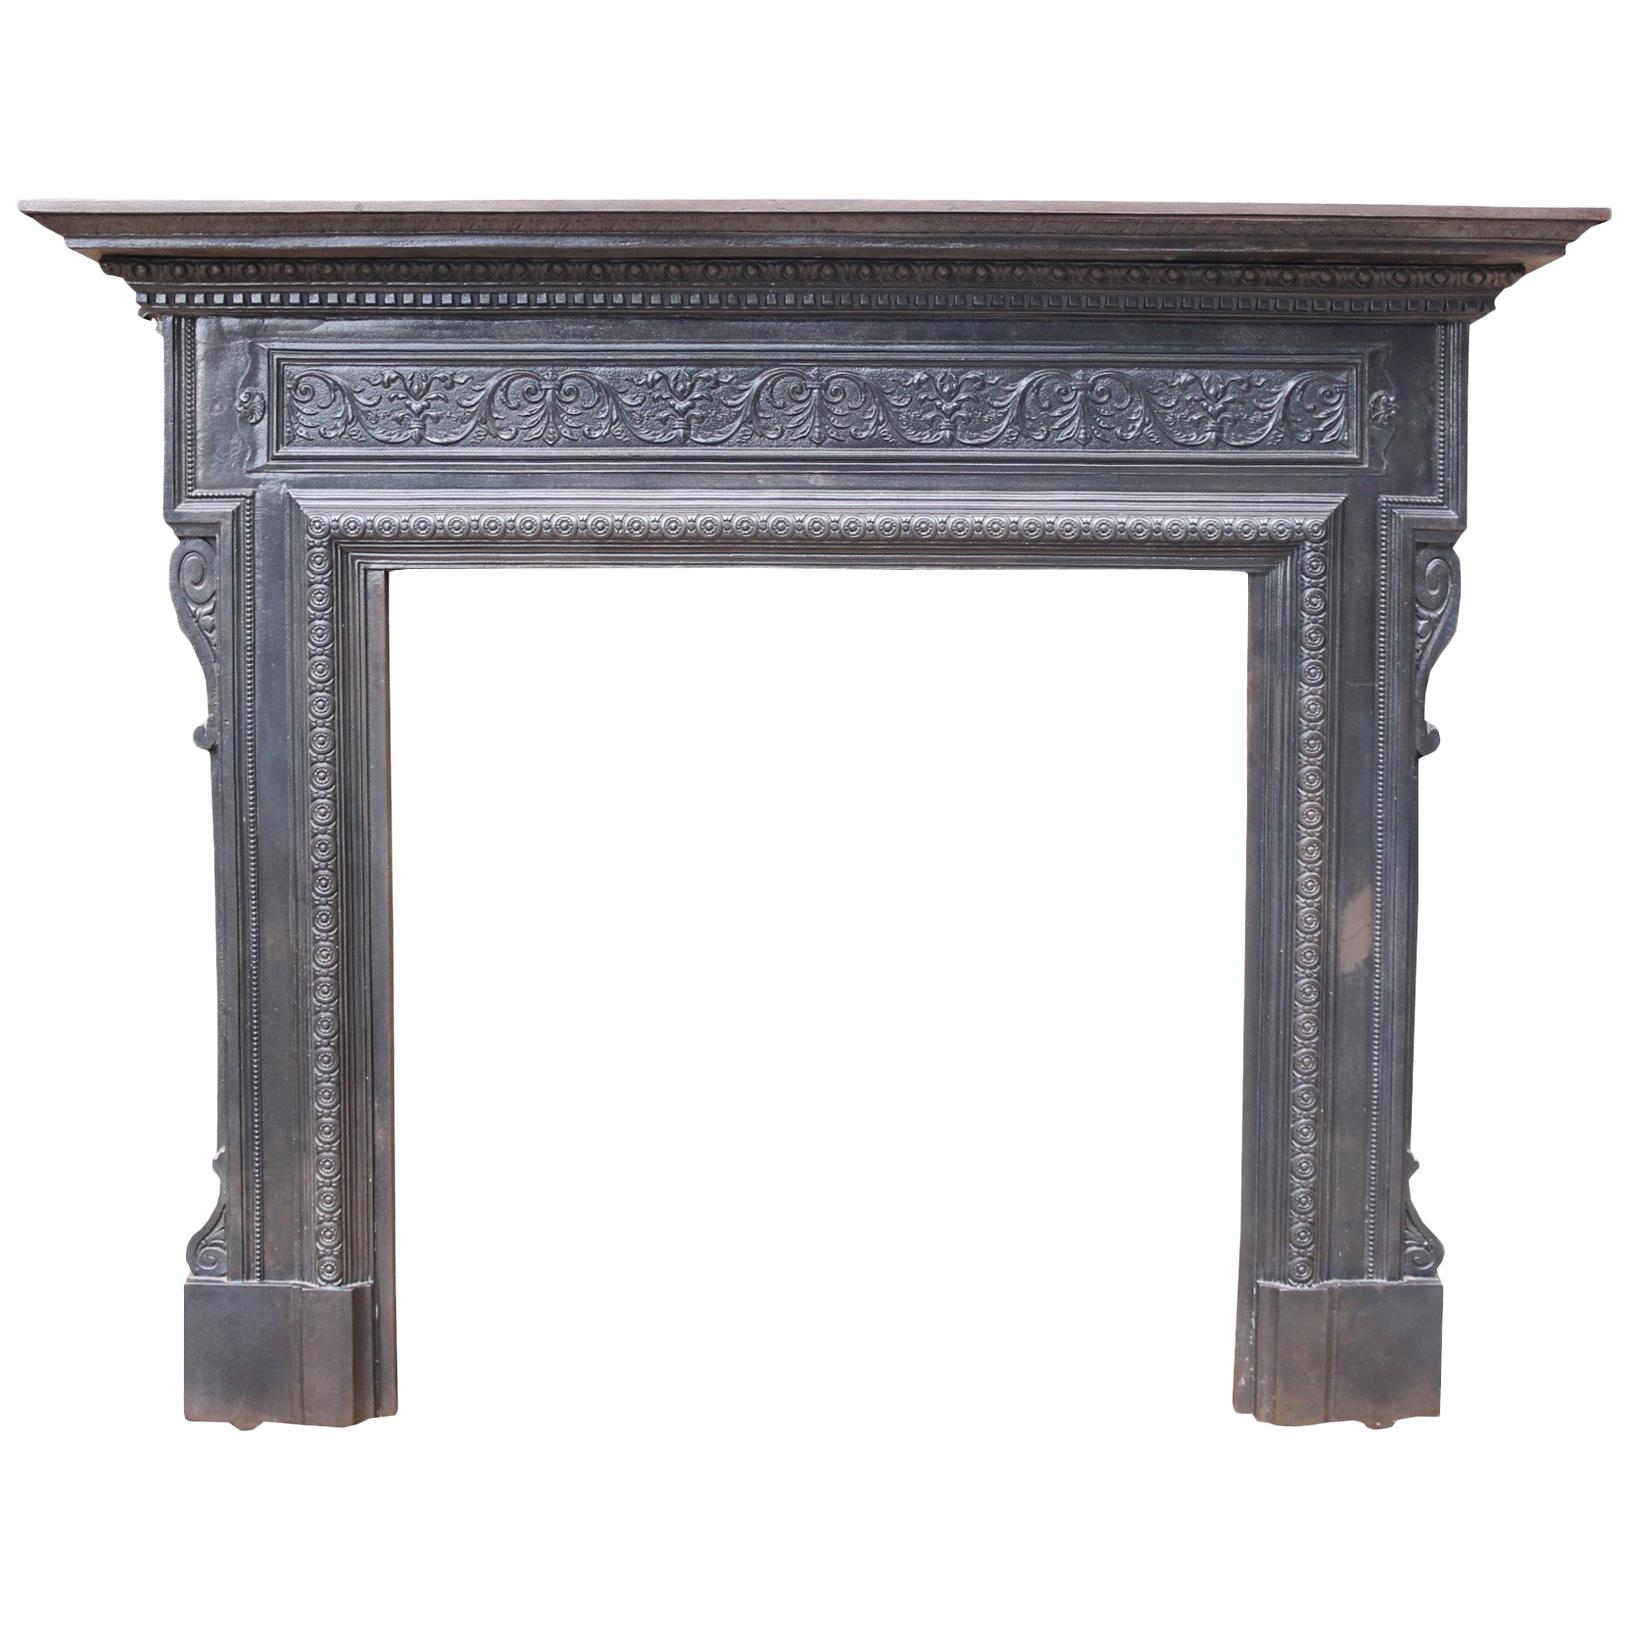 Reclaimed Antique Cast Iron Fireplace